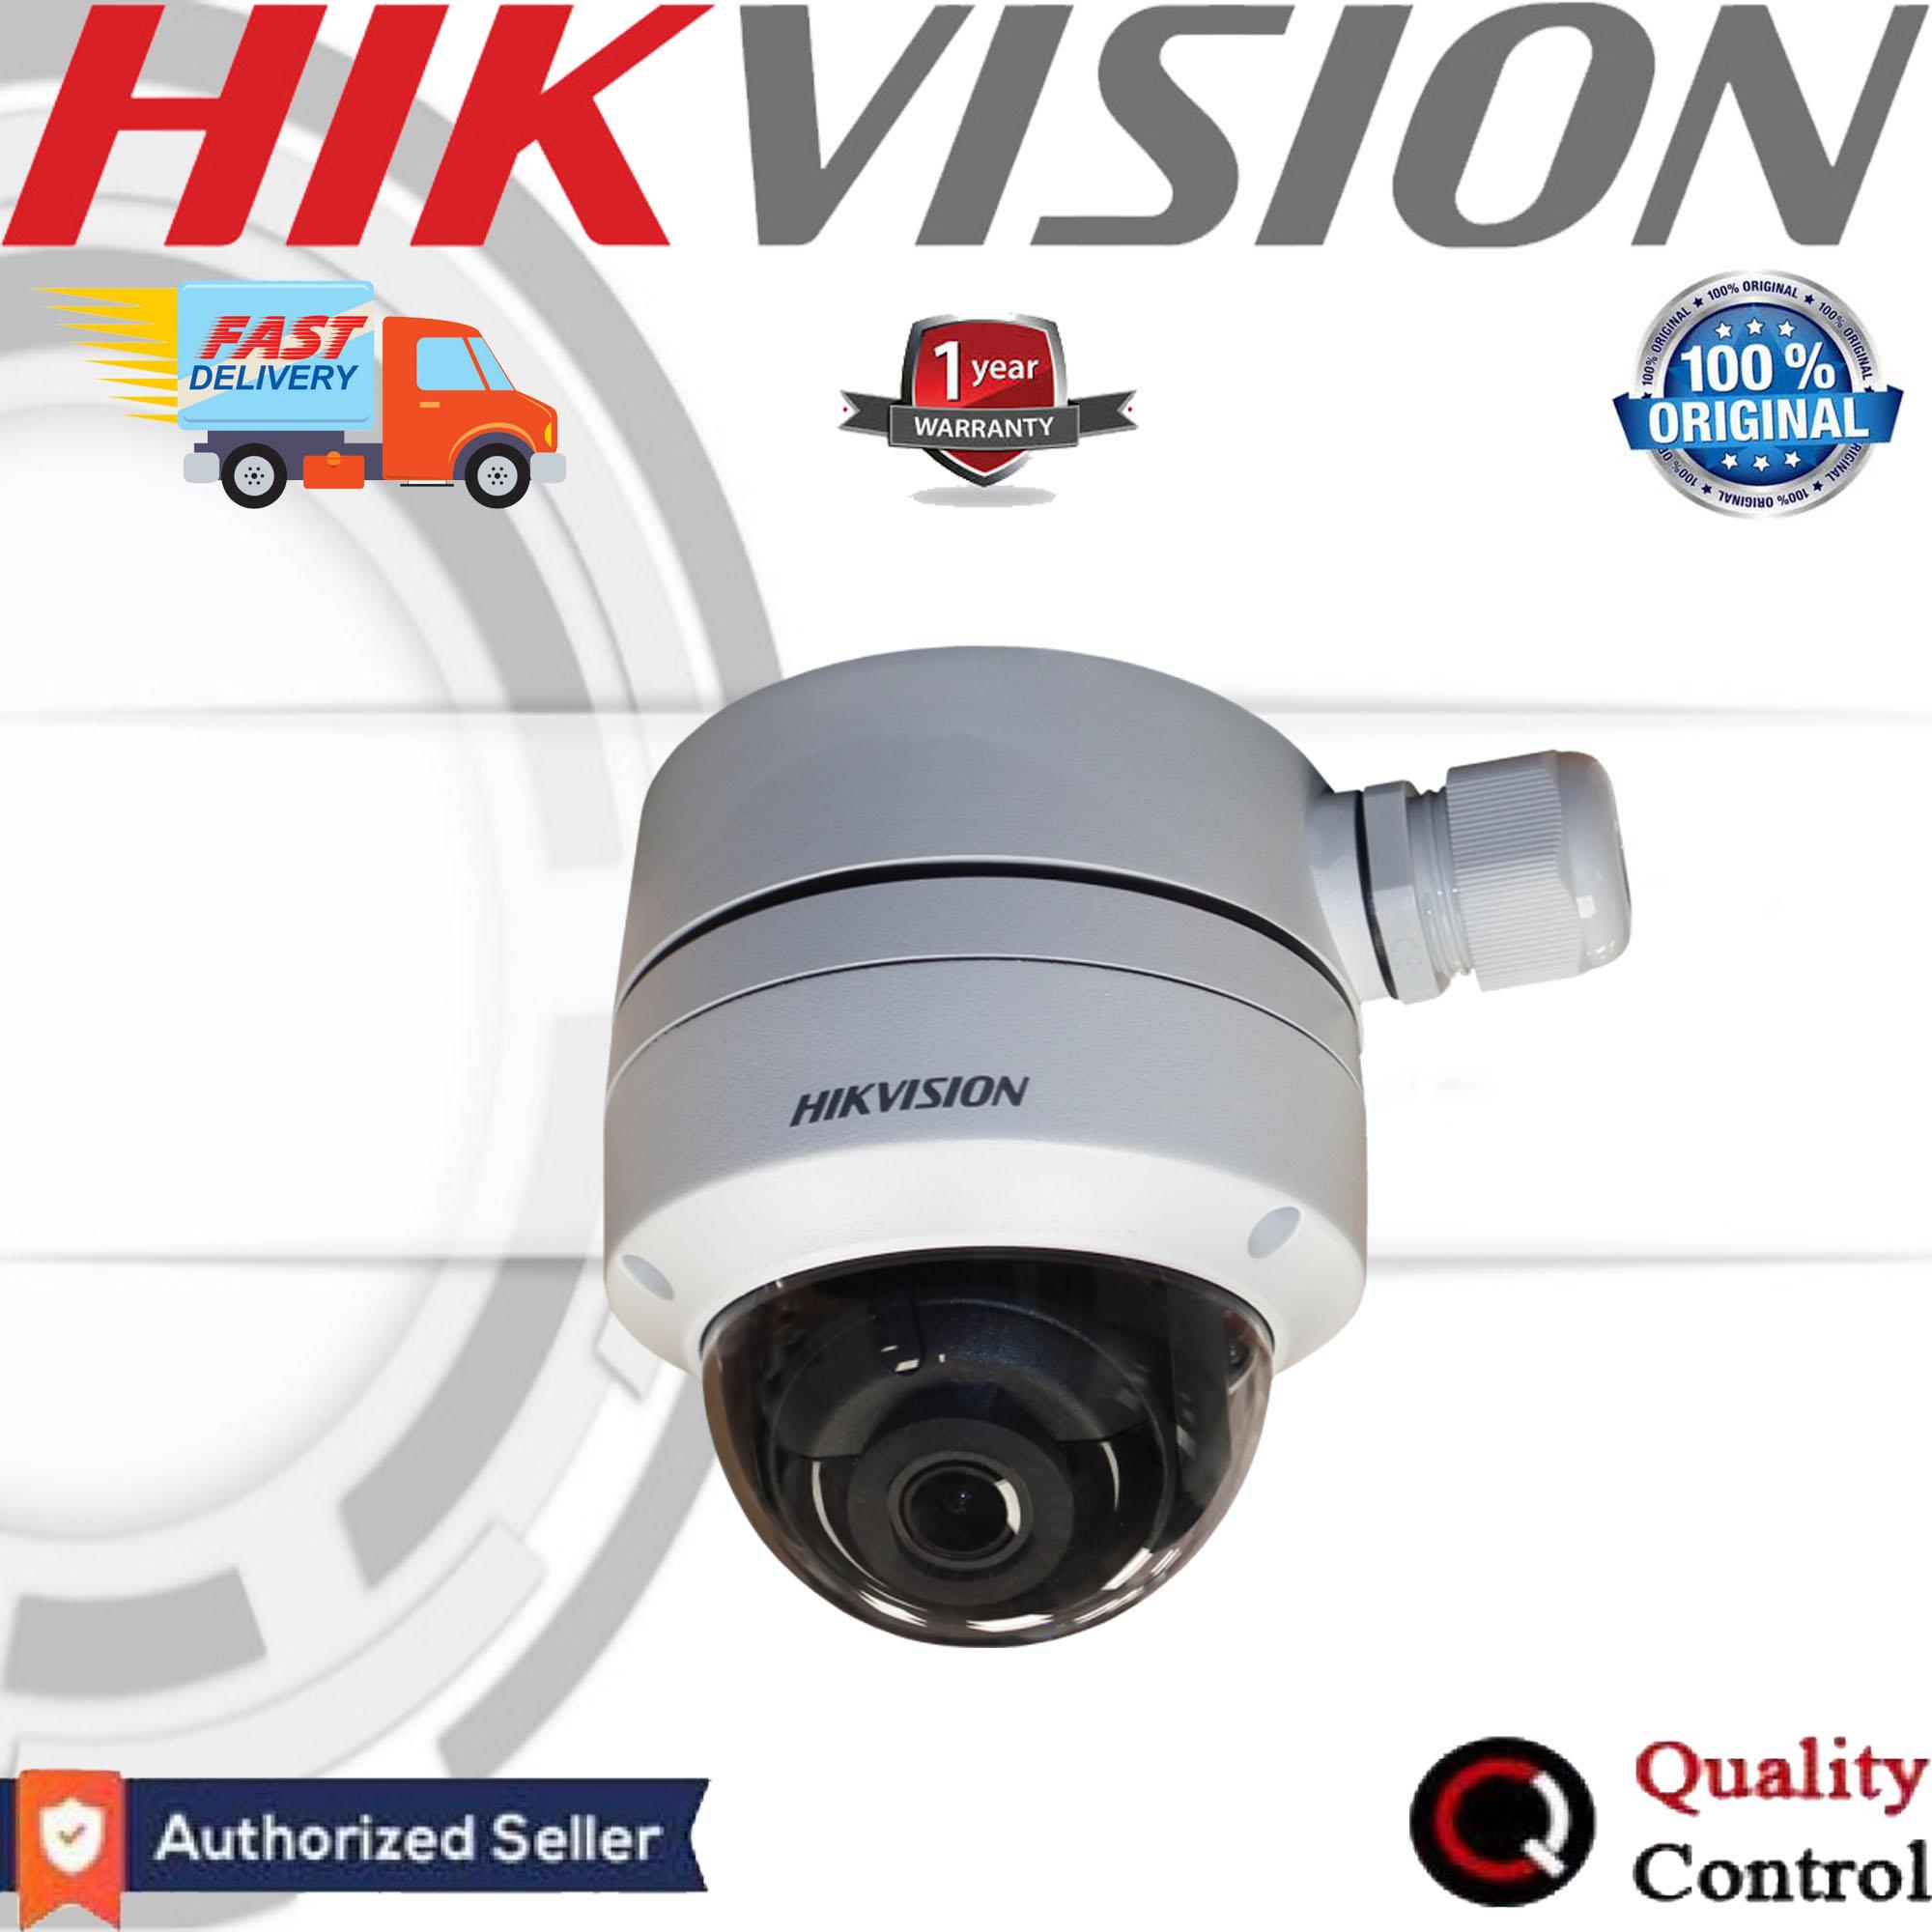 ir fixed dome network camera